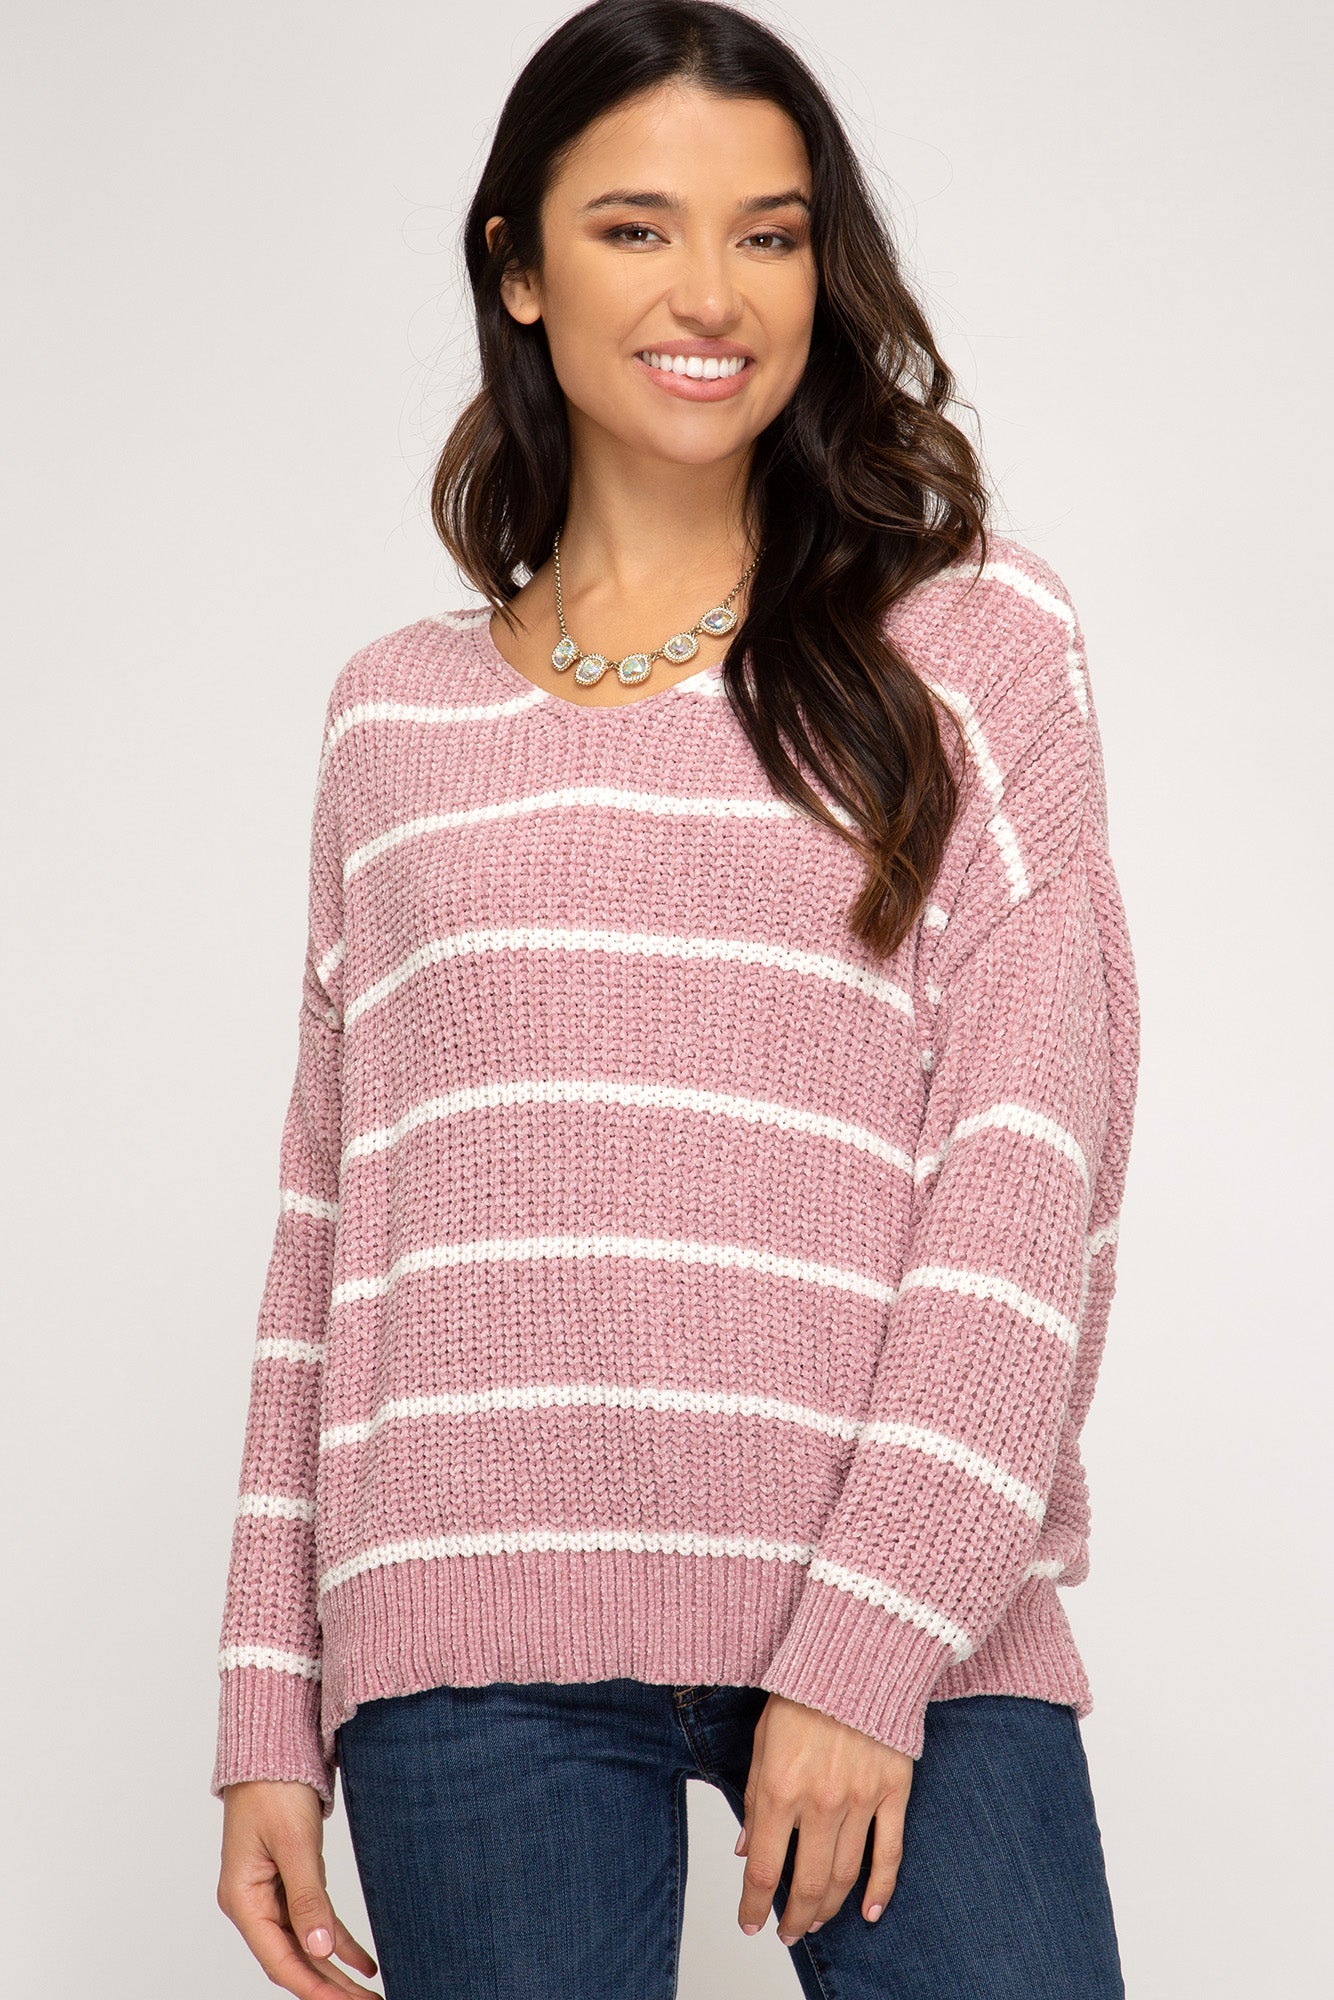 Long Sleeve Sweater With Open Back!